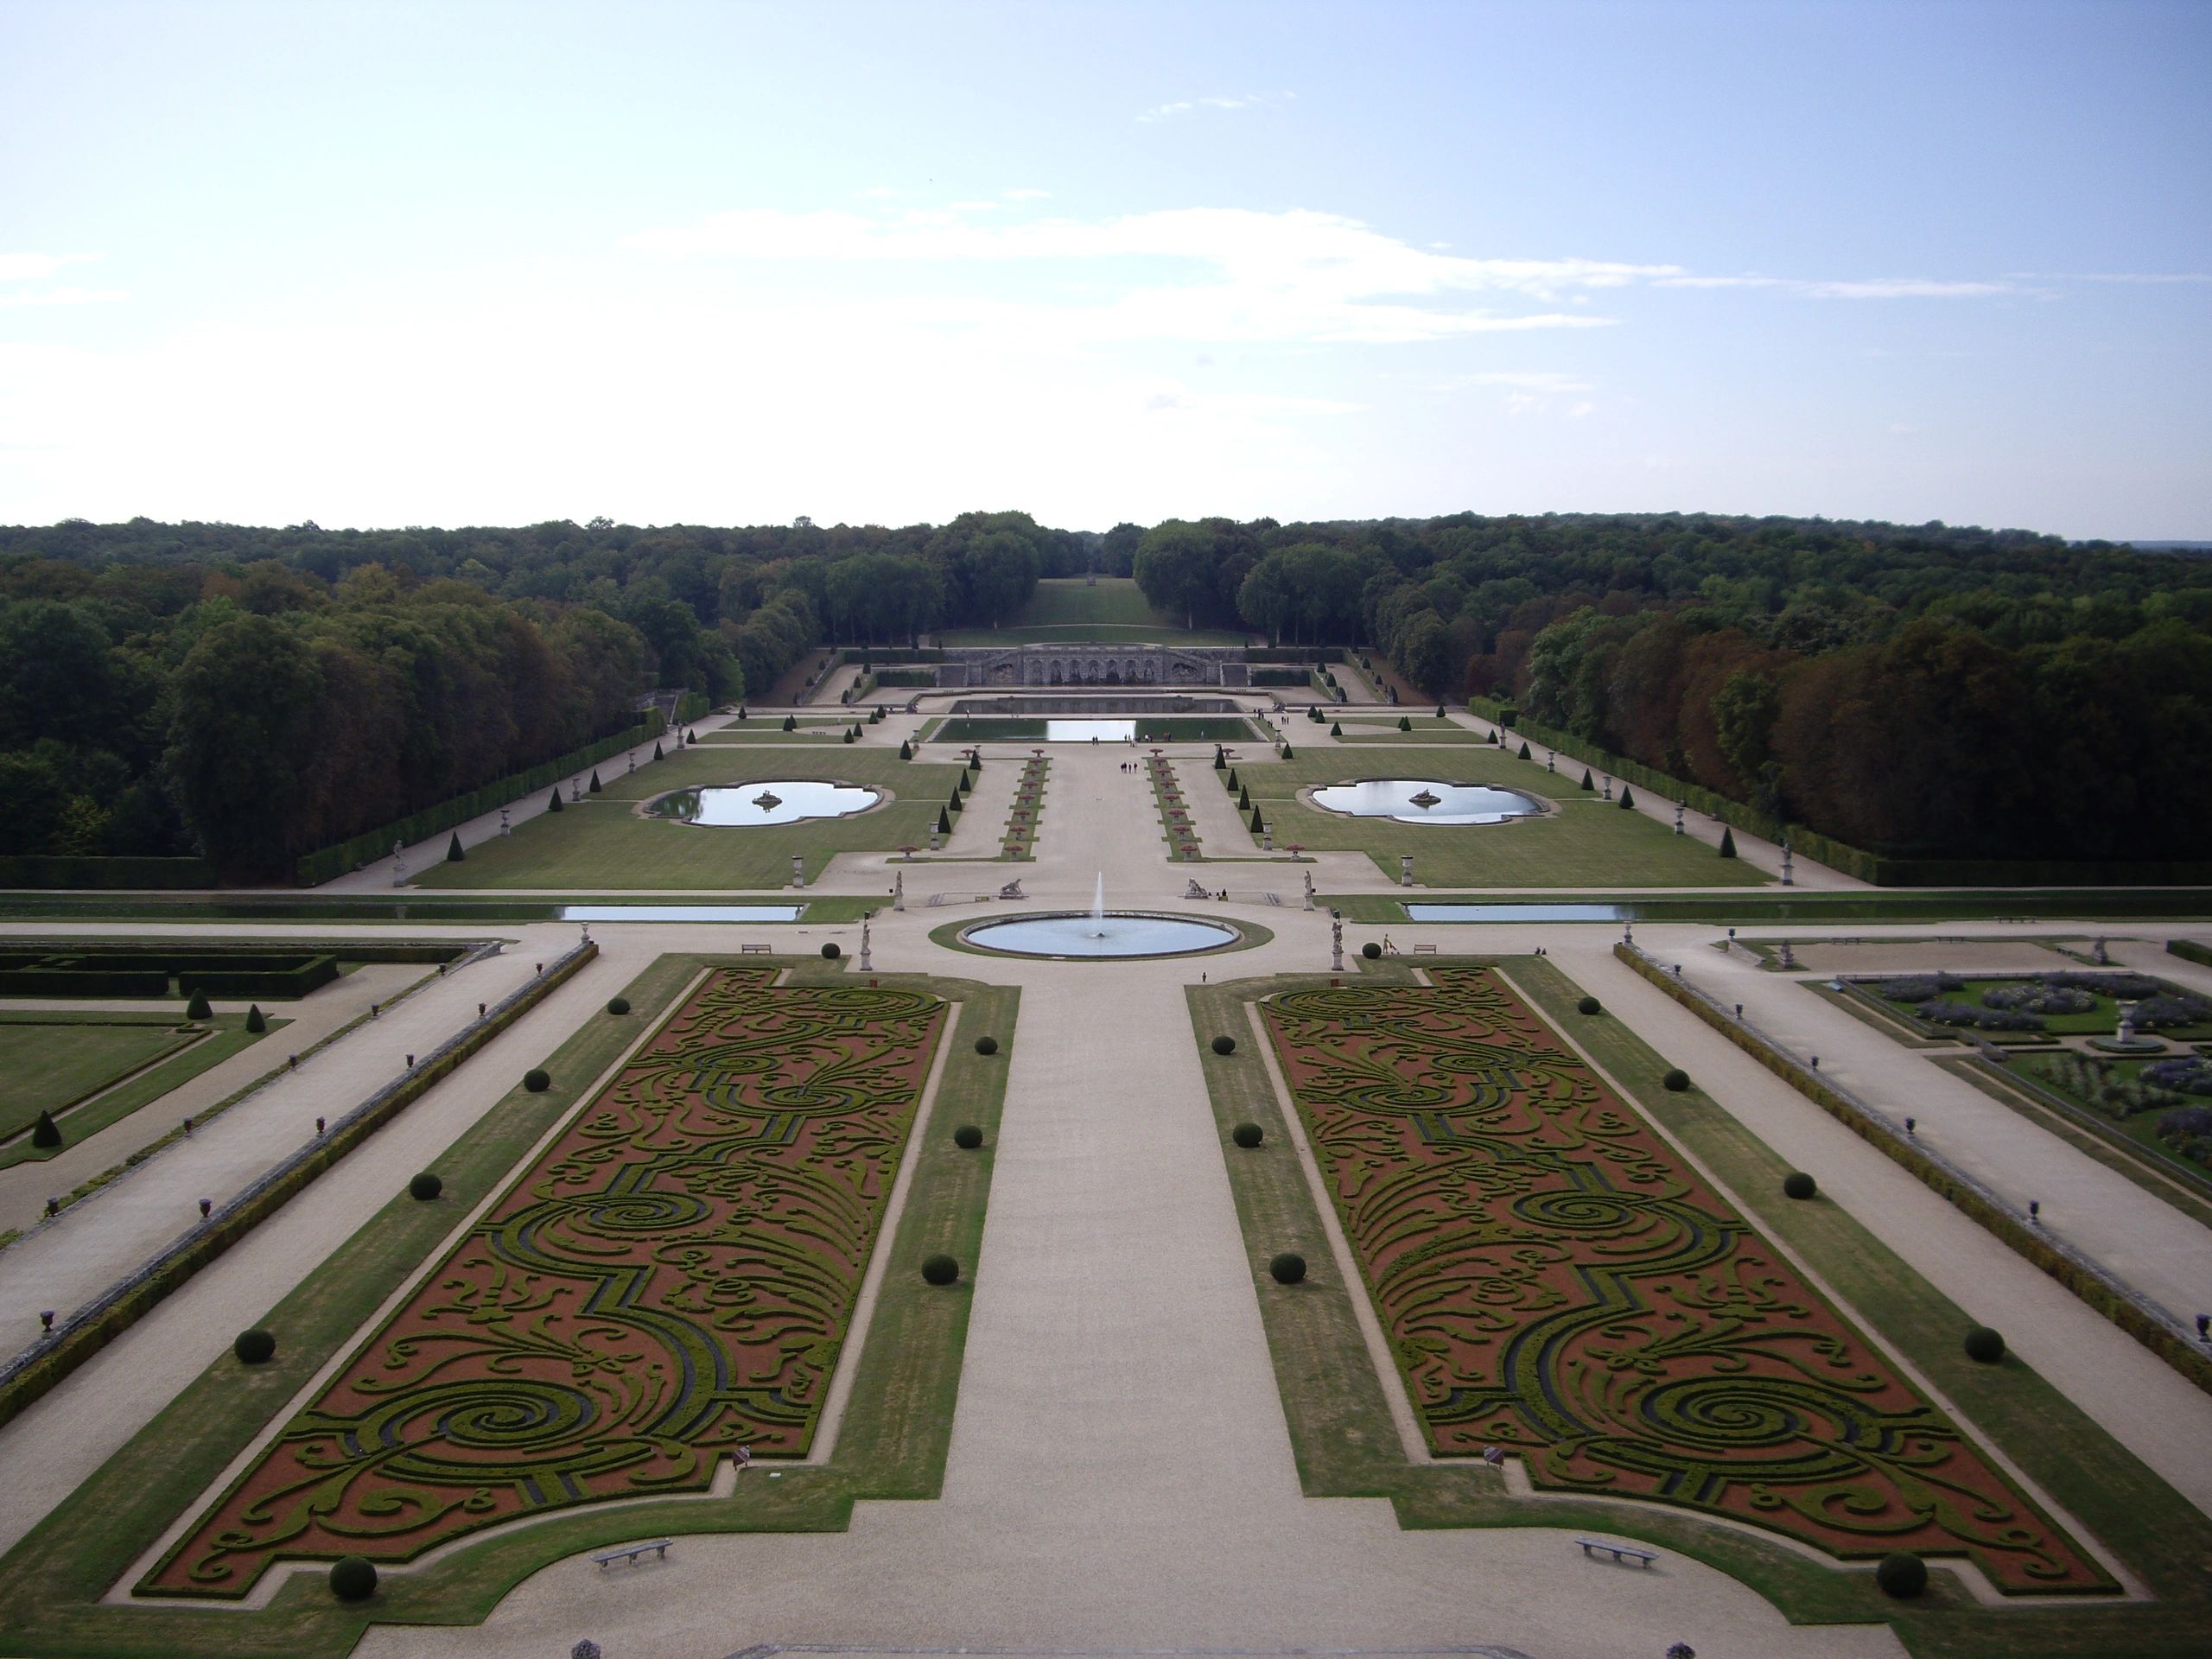 The Sun King's Garden: Louis XIV, Andre Le Notre and the Creation of the Gardens of Versailles [Book]